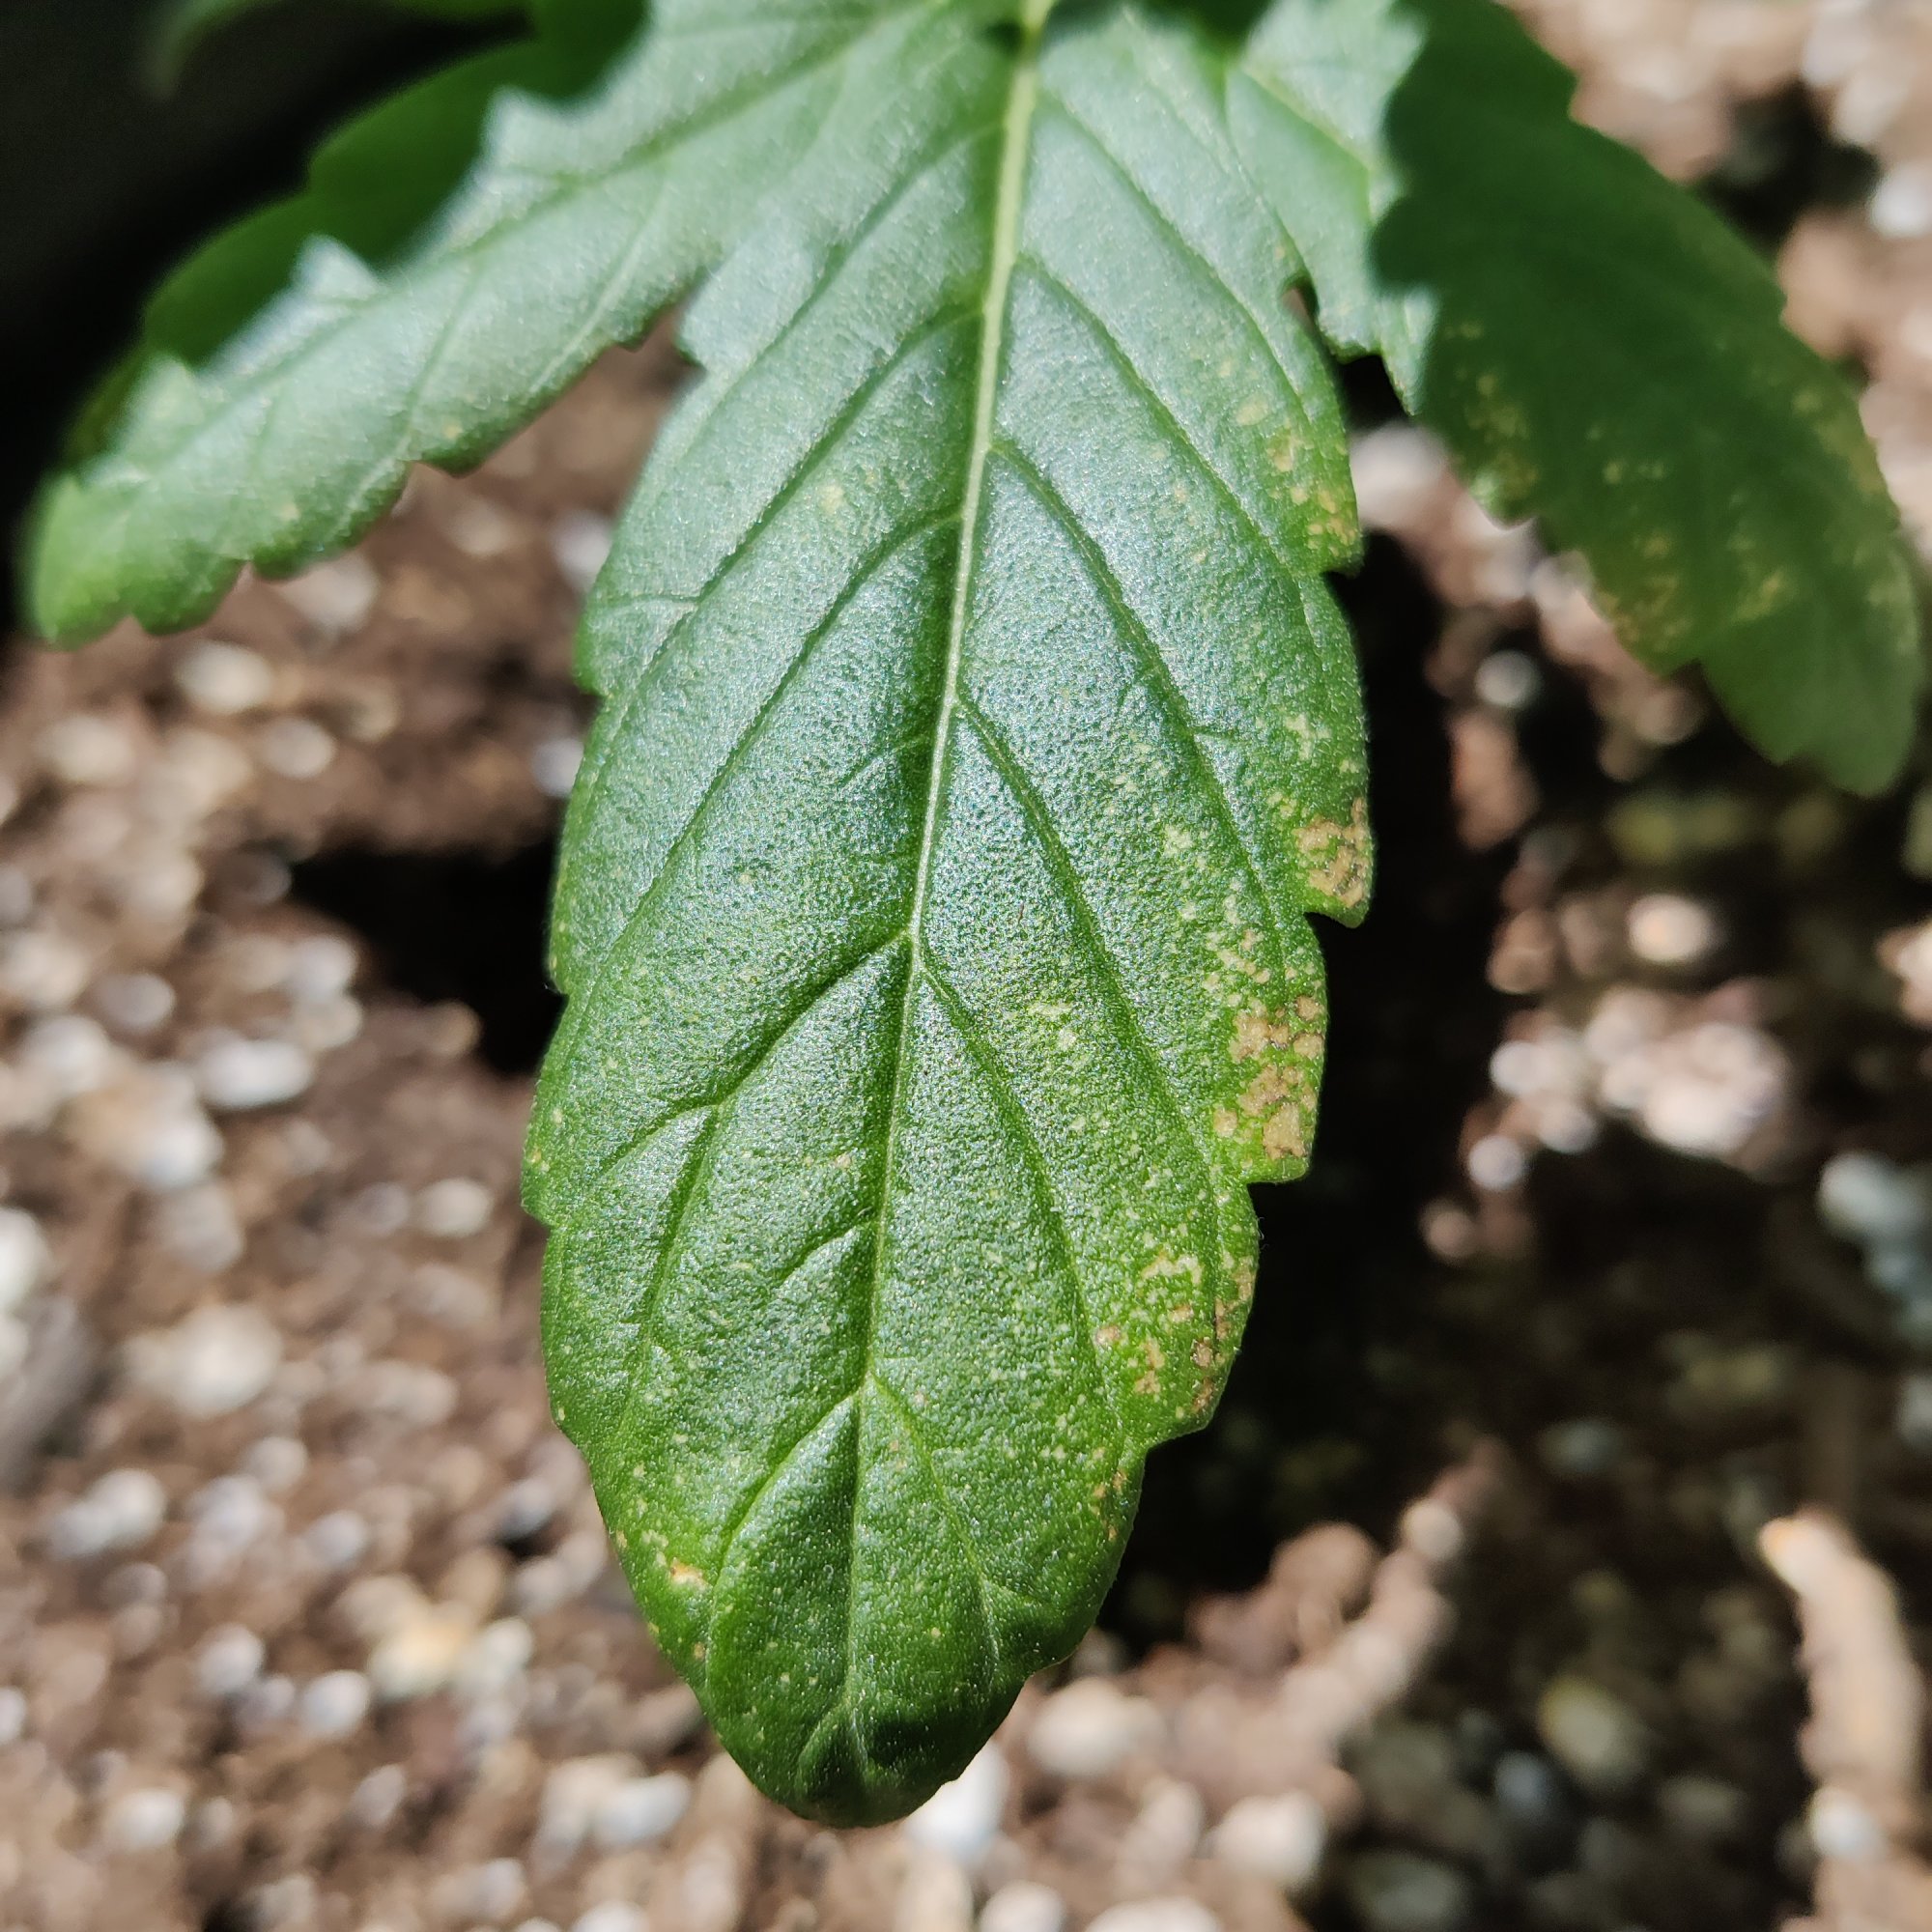 Yellowbrownish spots on leaves 3